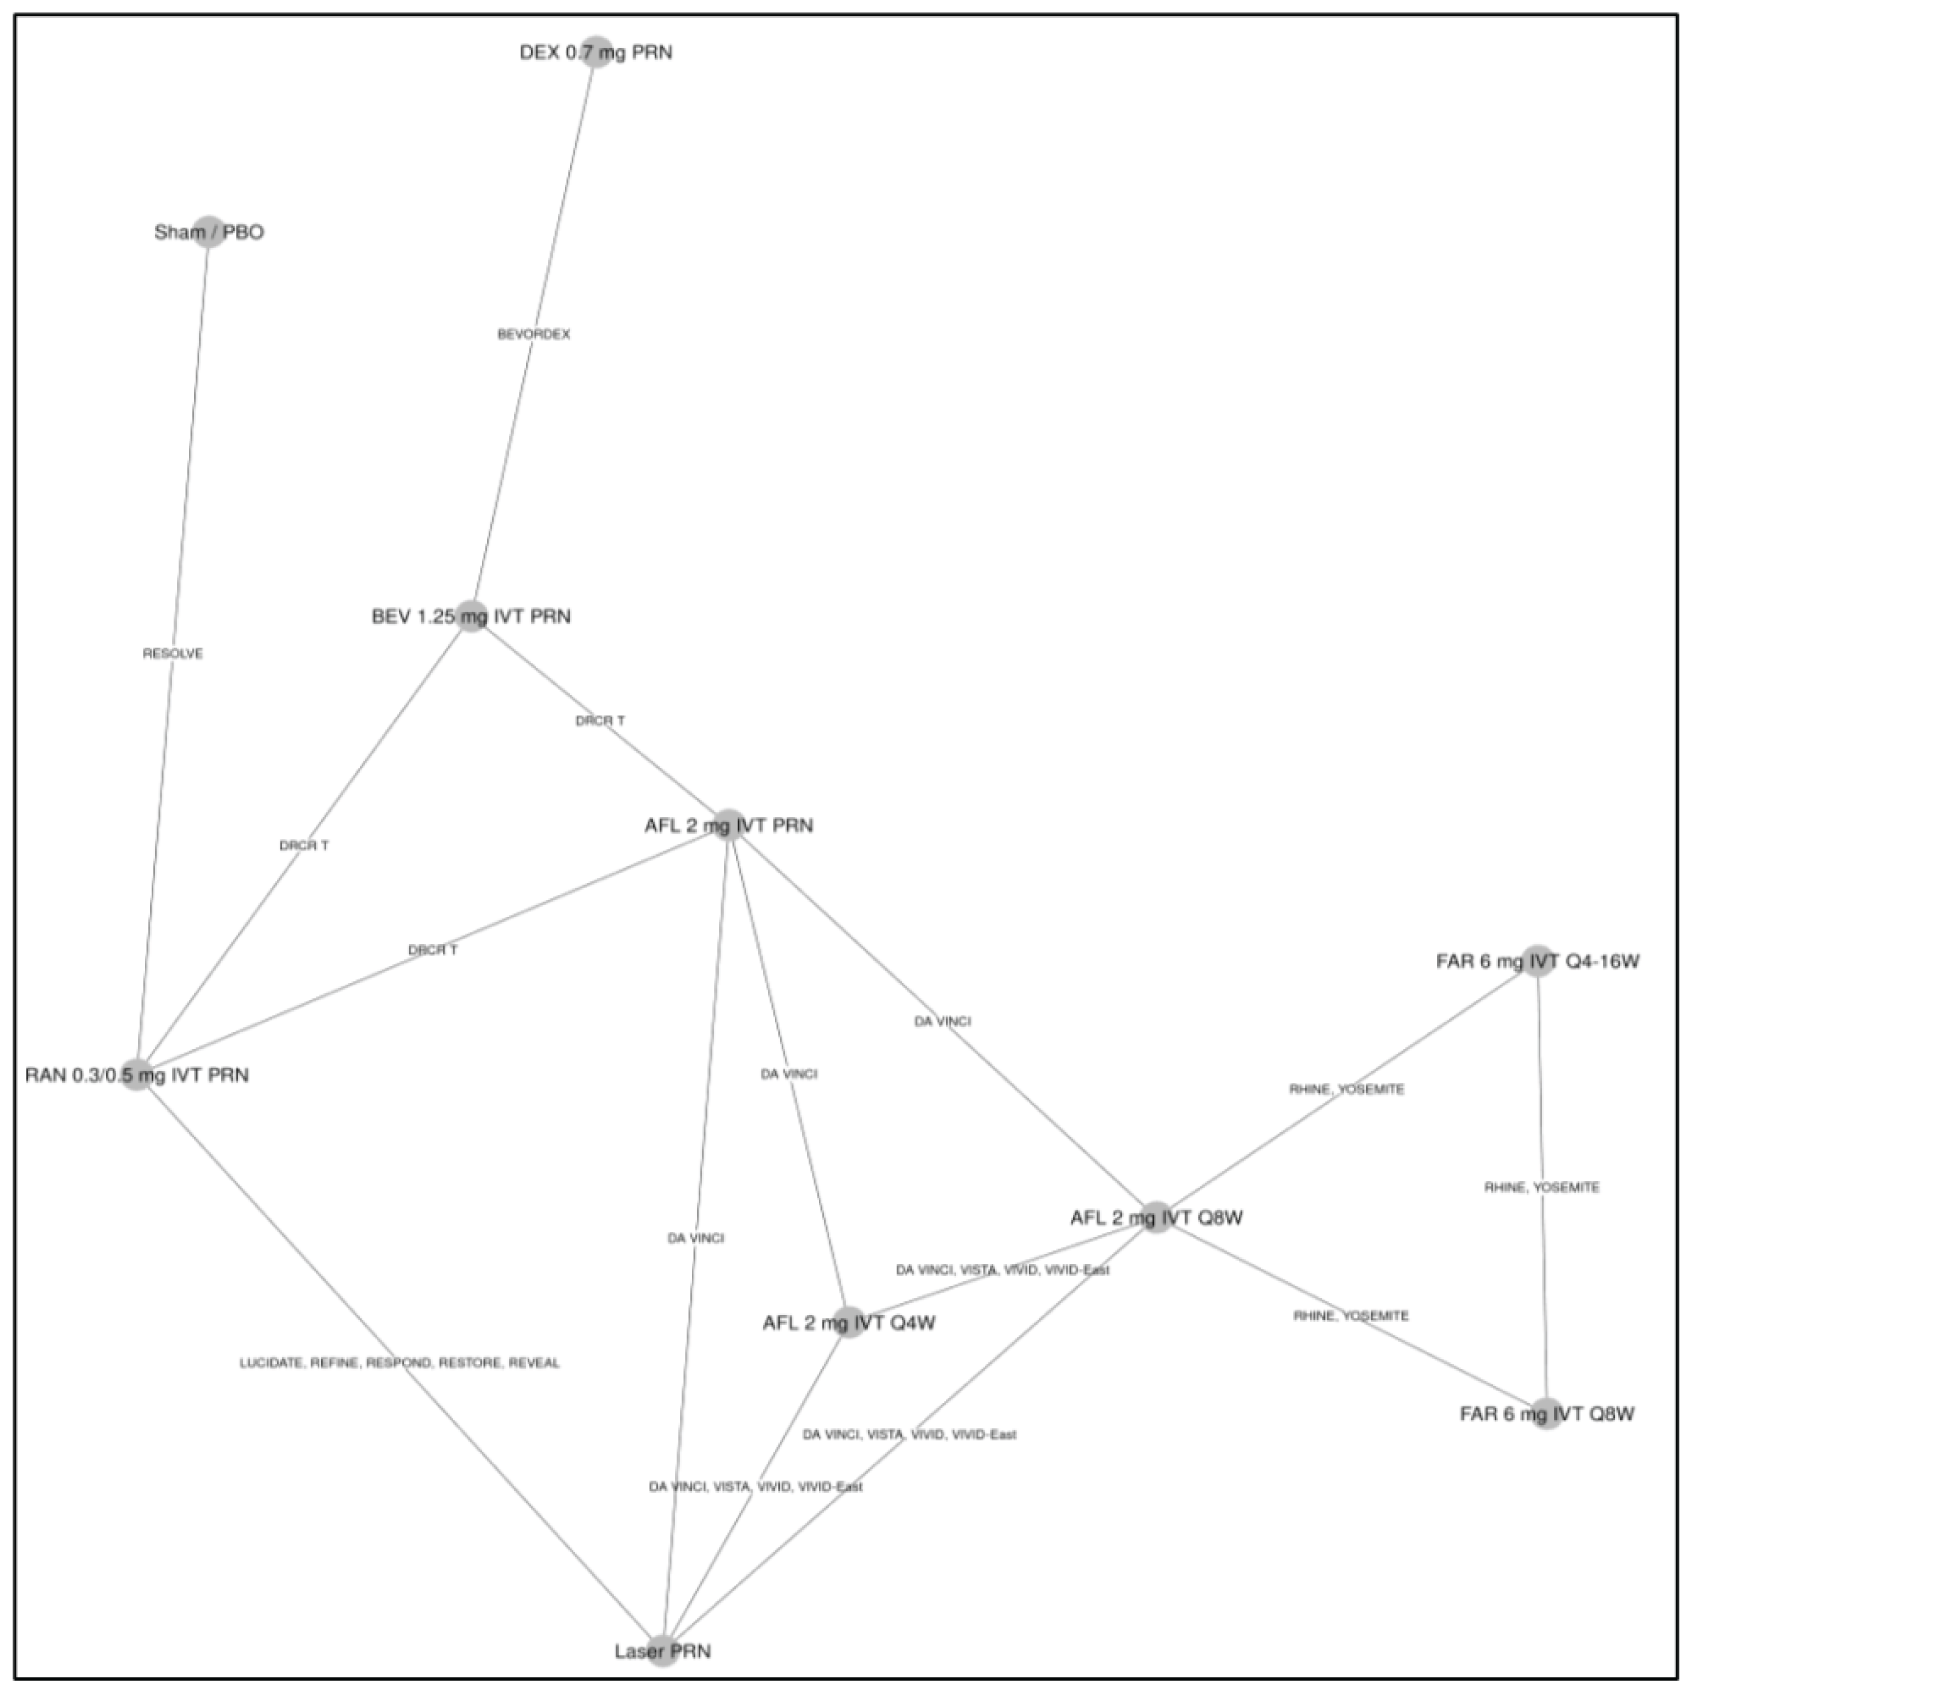 Fourteen trials reported on overall treatment discontinuation at 12 months and were connected in a network. There are 3 connected star diagrams with 3 or more connections: aflibercept 2 mg IVT PRN; aflibercept 2 mg IVT q.4.w.; and aflibercept 2 mg IVT q.8.w. The most common connection was aflibercept 2 mg IVT q.8.w.